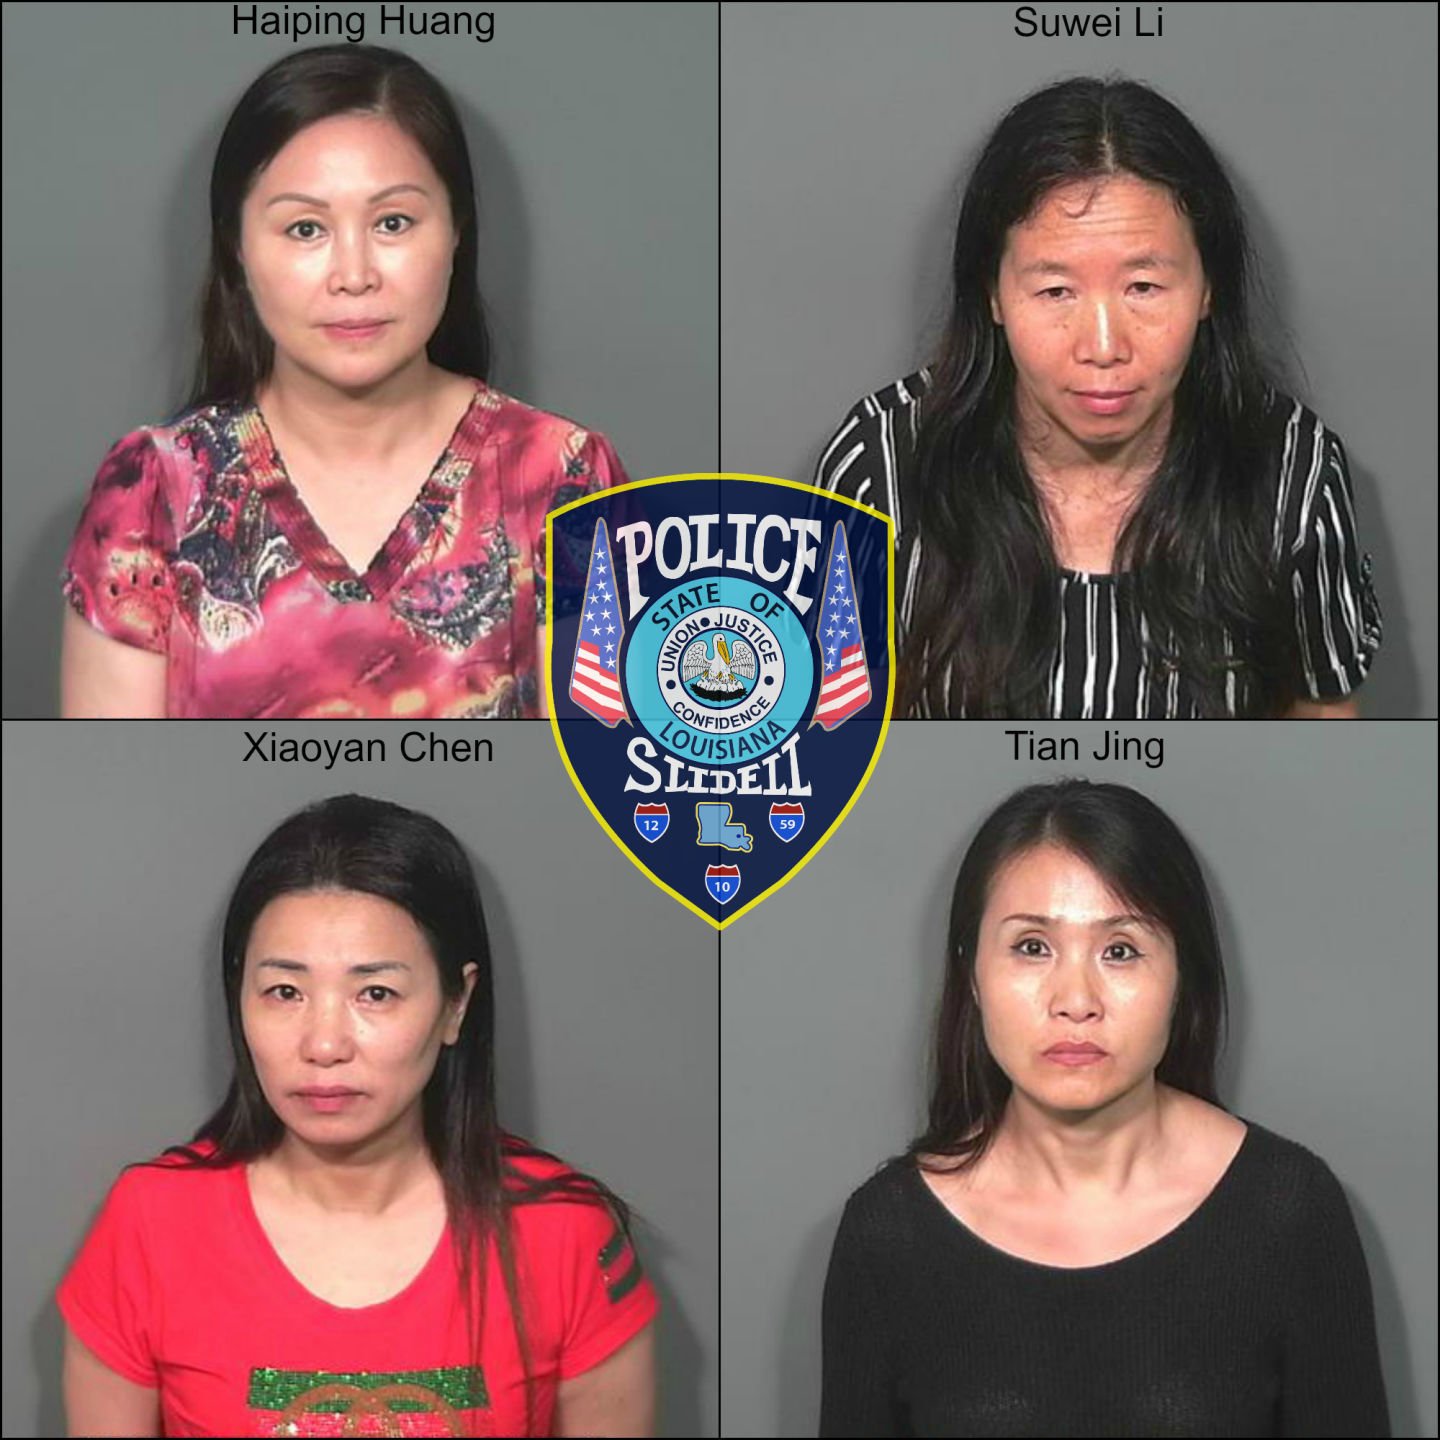 Three women arrested after multi-agency raids at massage parlors